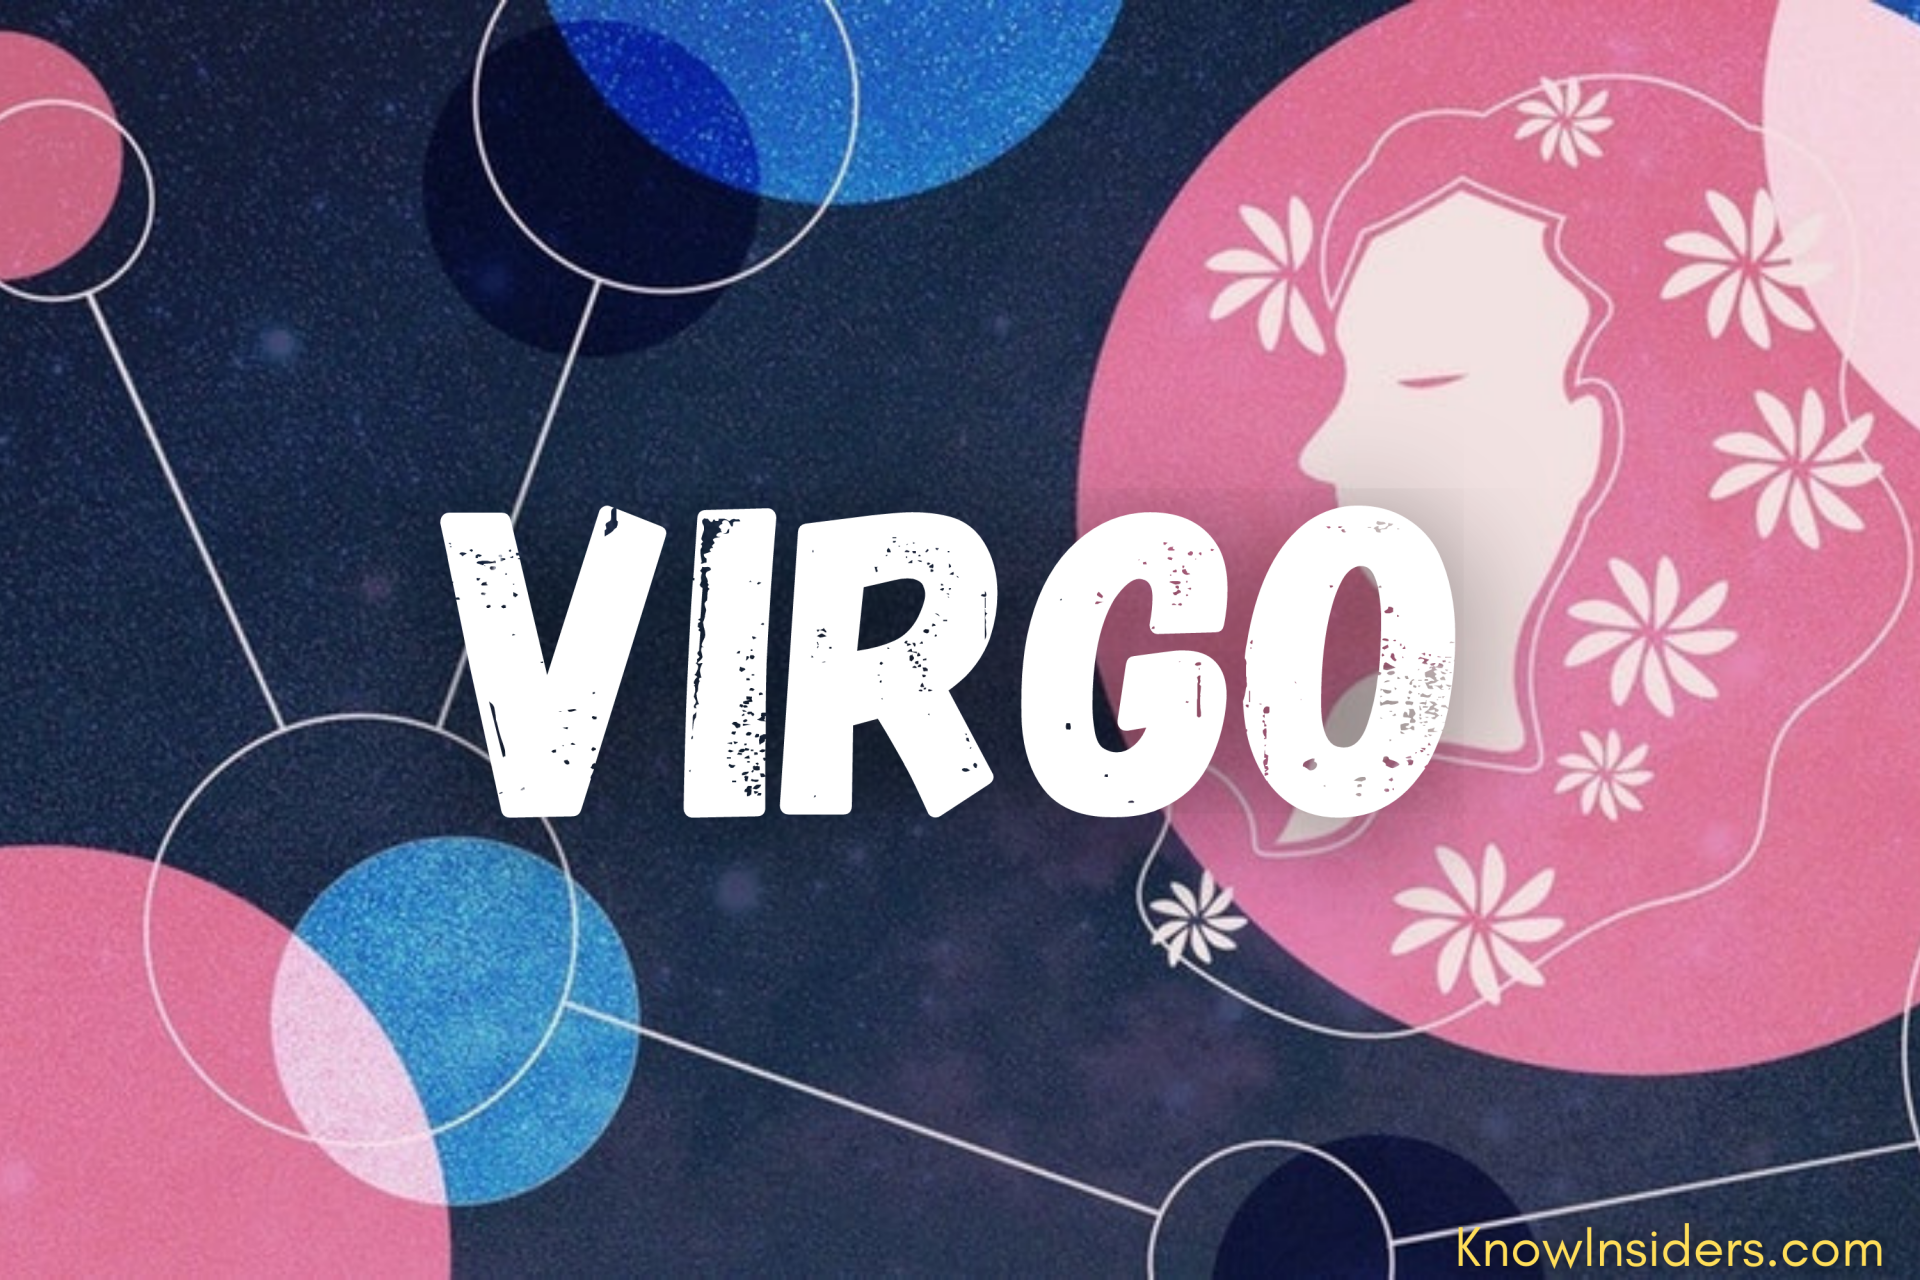 VIRGO Monthly Horoscope July 2021 - Predictions for Love, Health, Career and Money